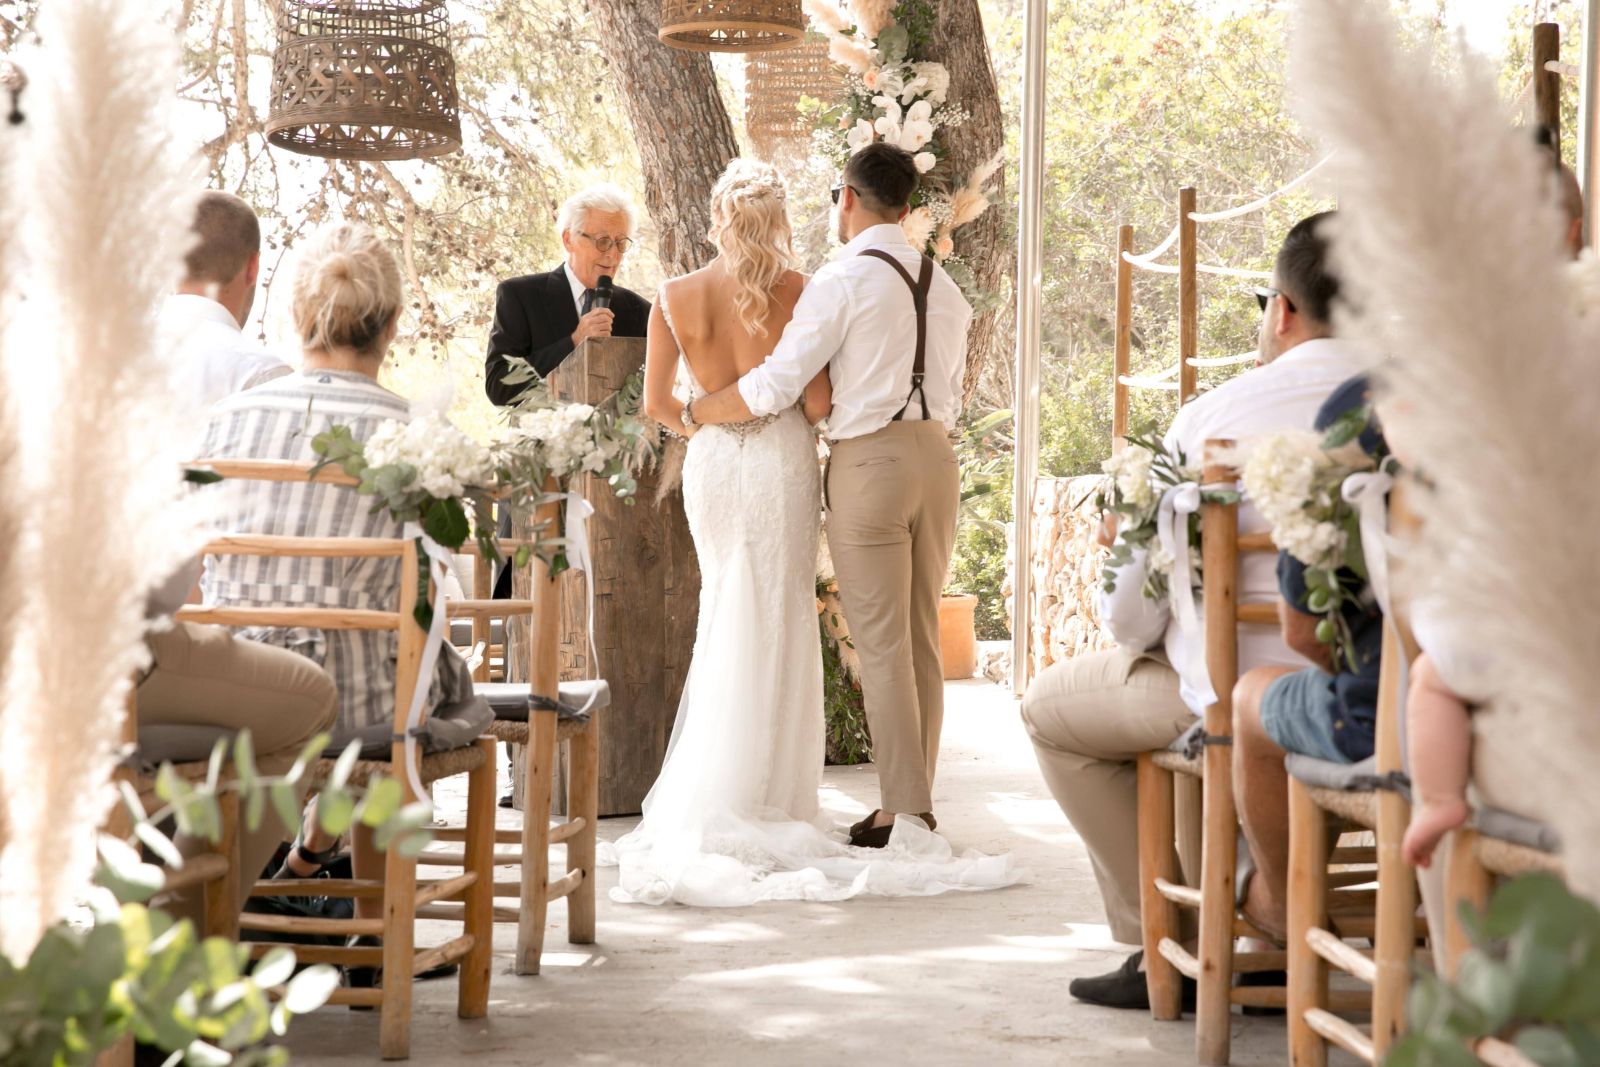 View of the ceremony during a wedding in Ibiza